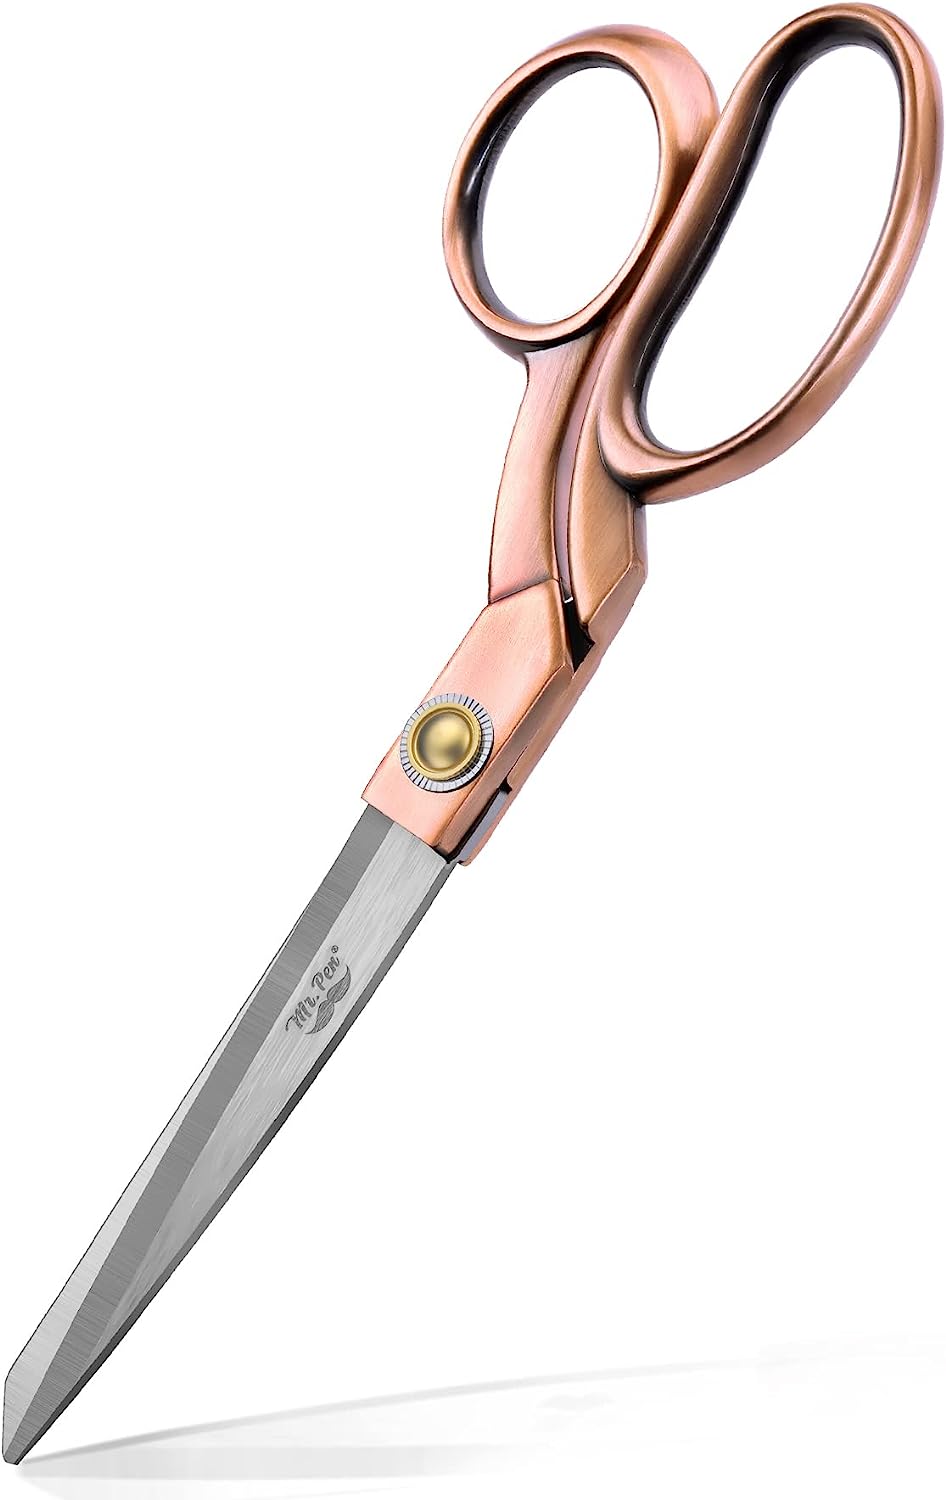 Fabric Scissors, Heavy-duty Tailor's Scissors, All-metal Stainless